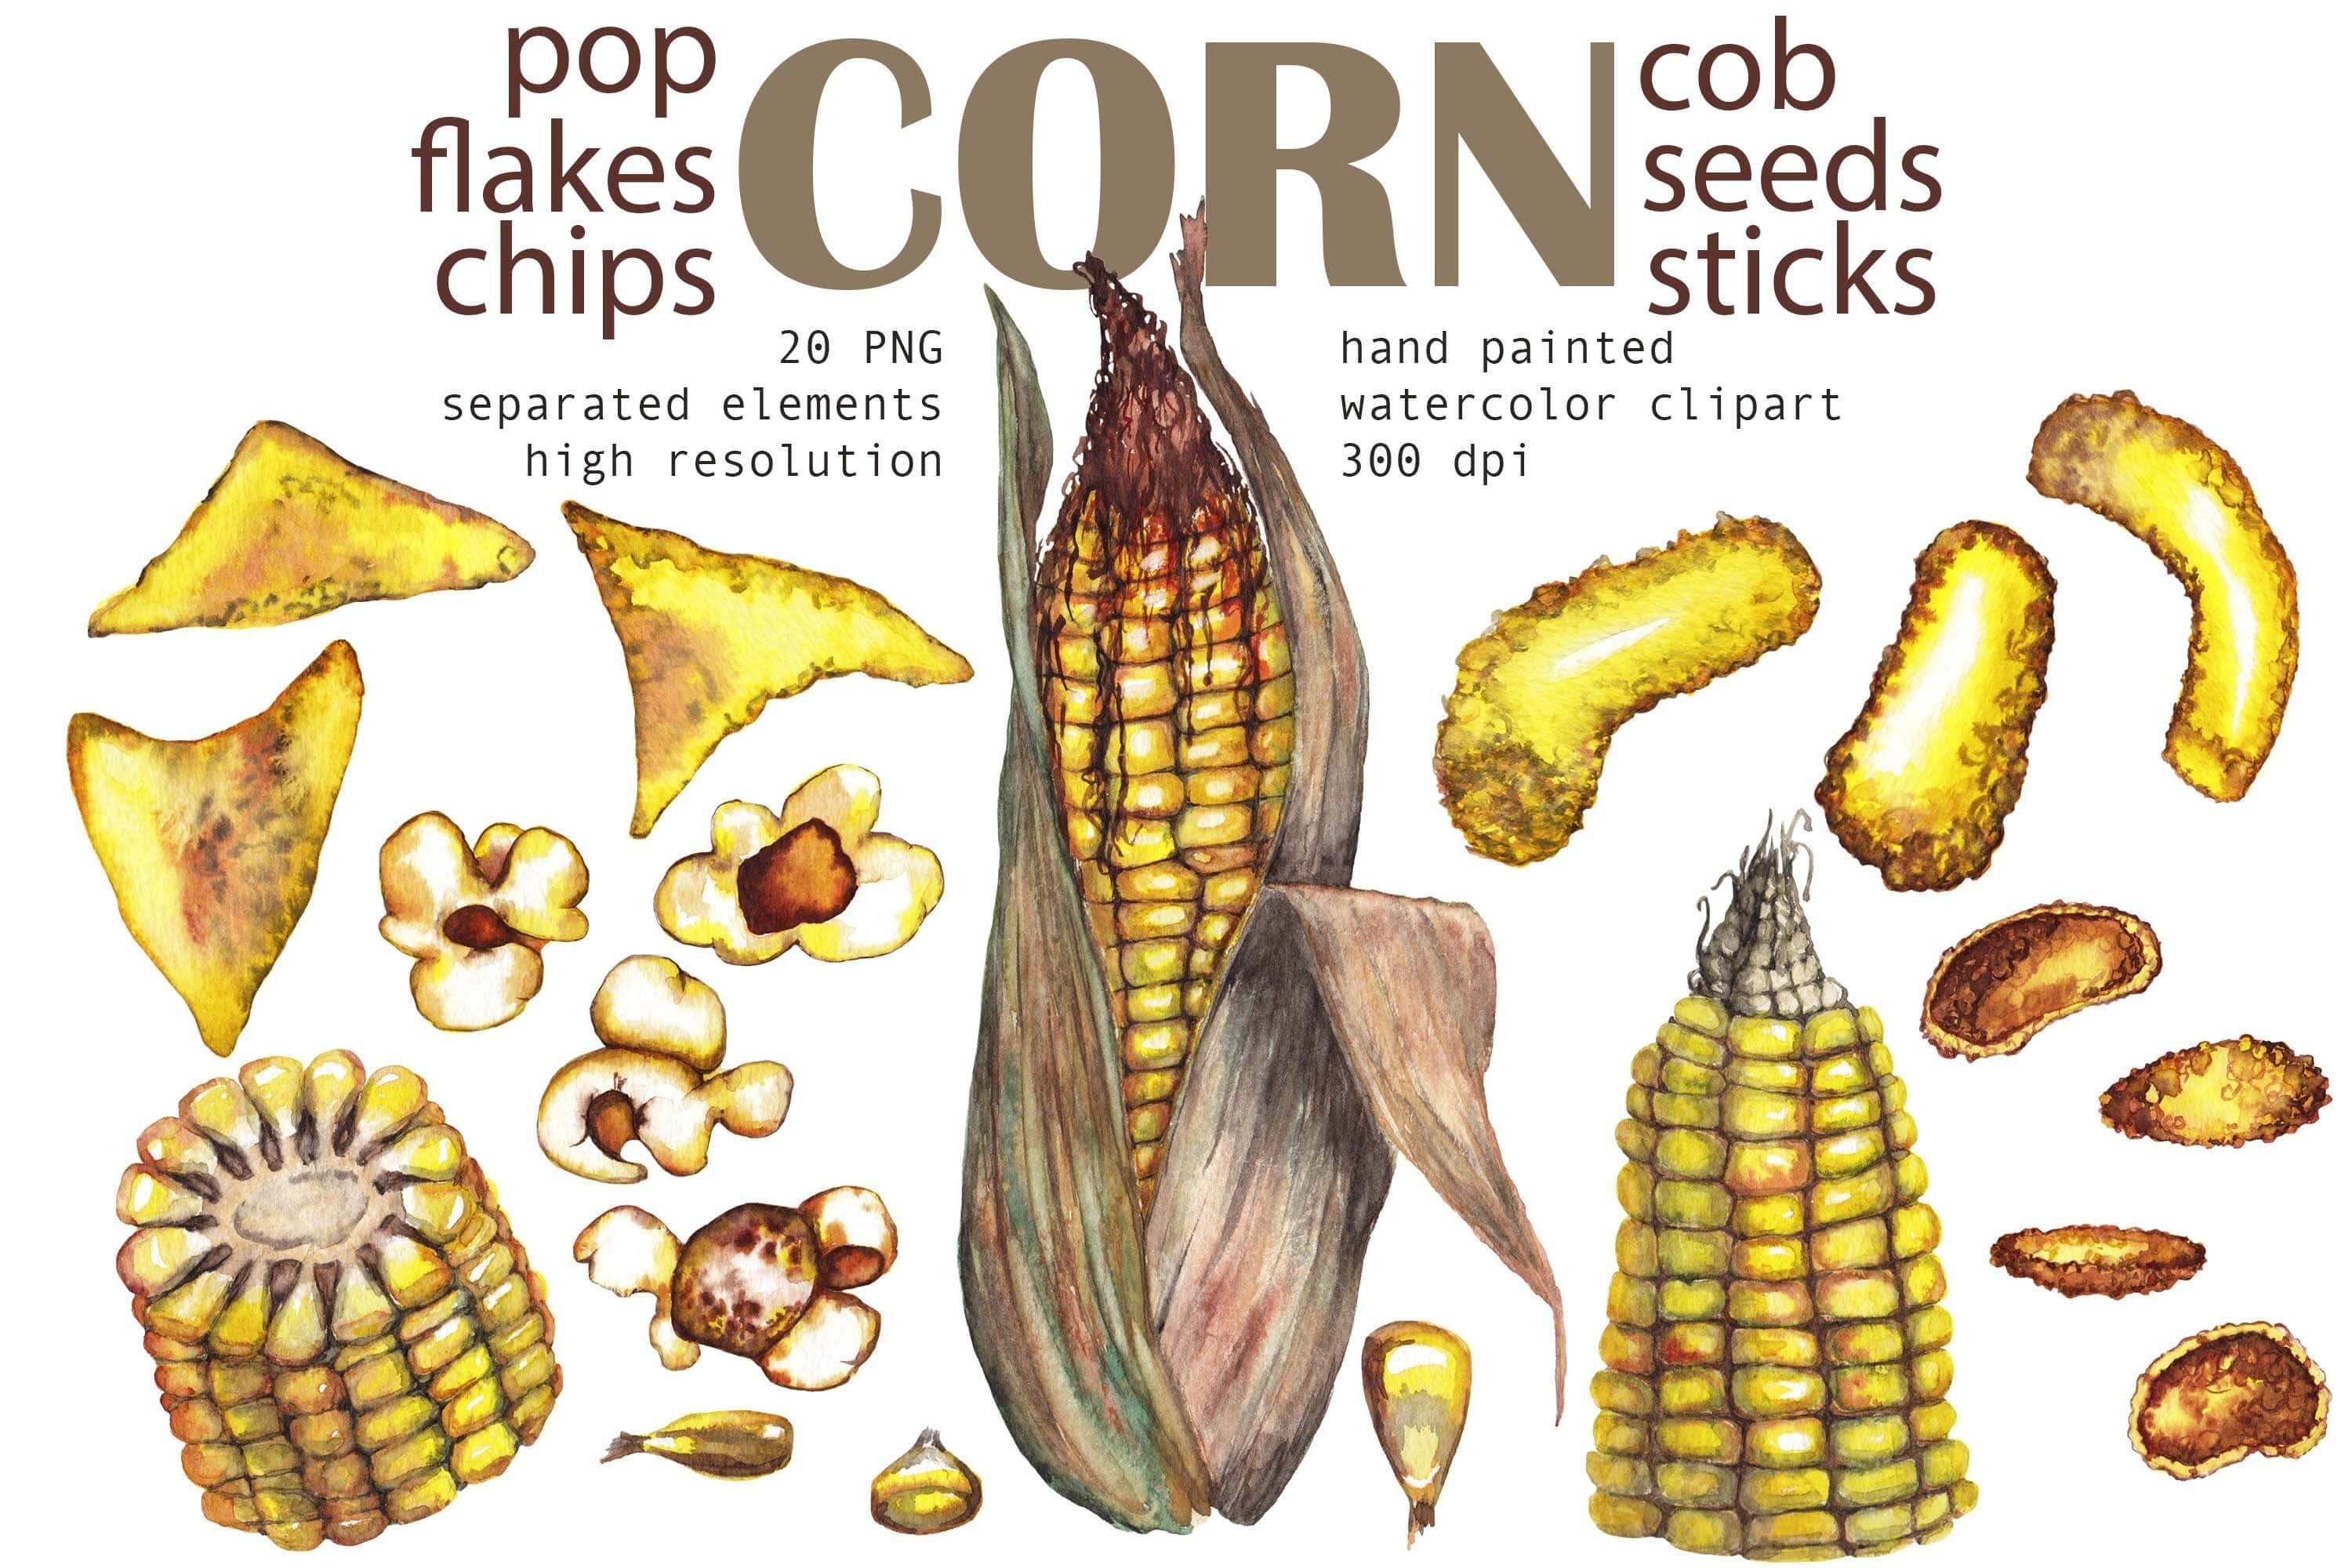 20 Corn pop, flakes and chips separated elements.